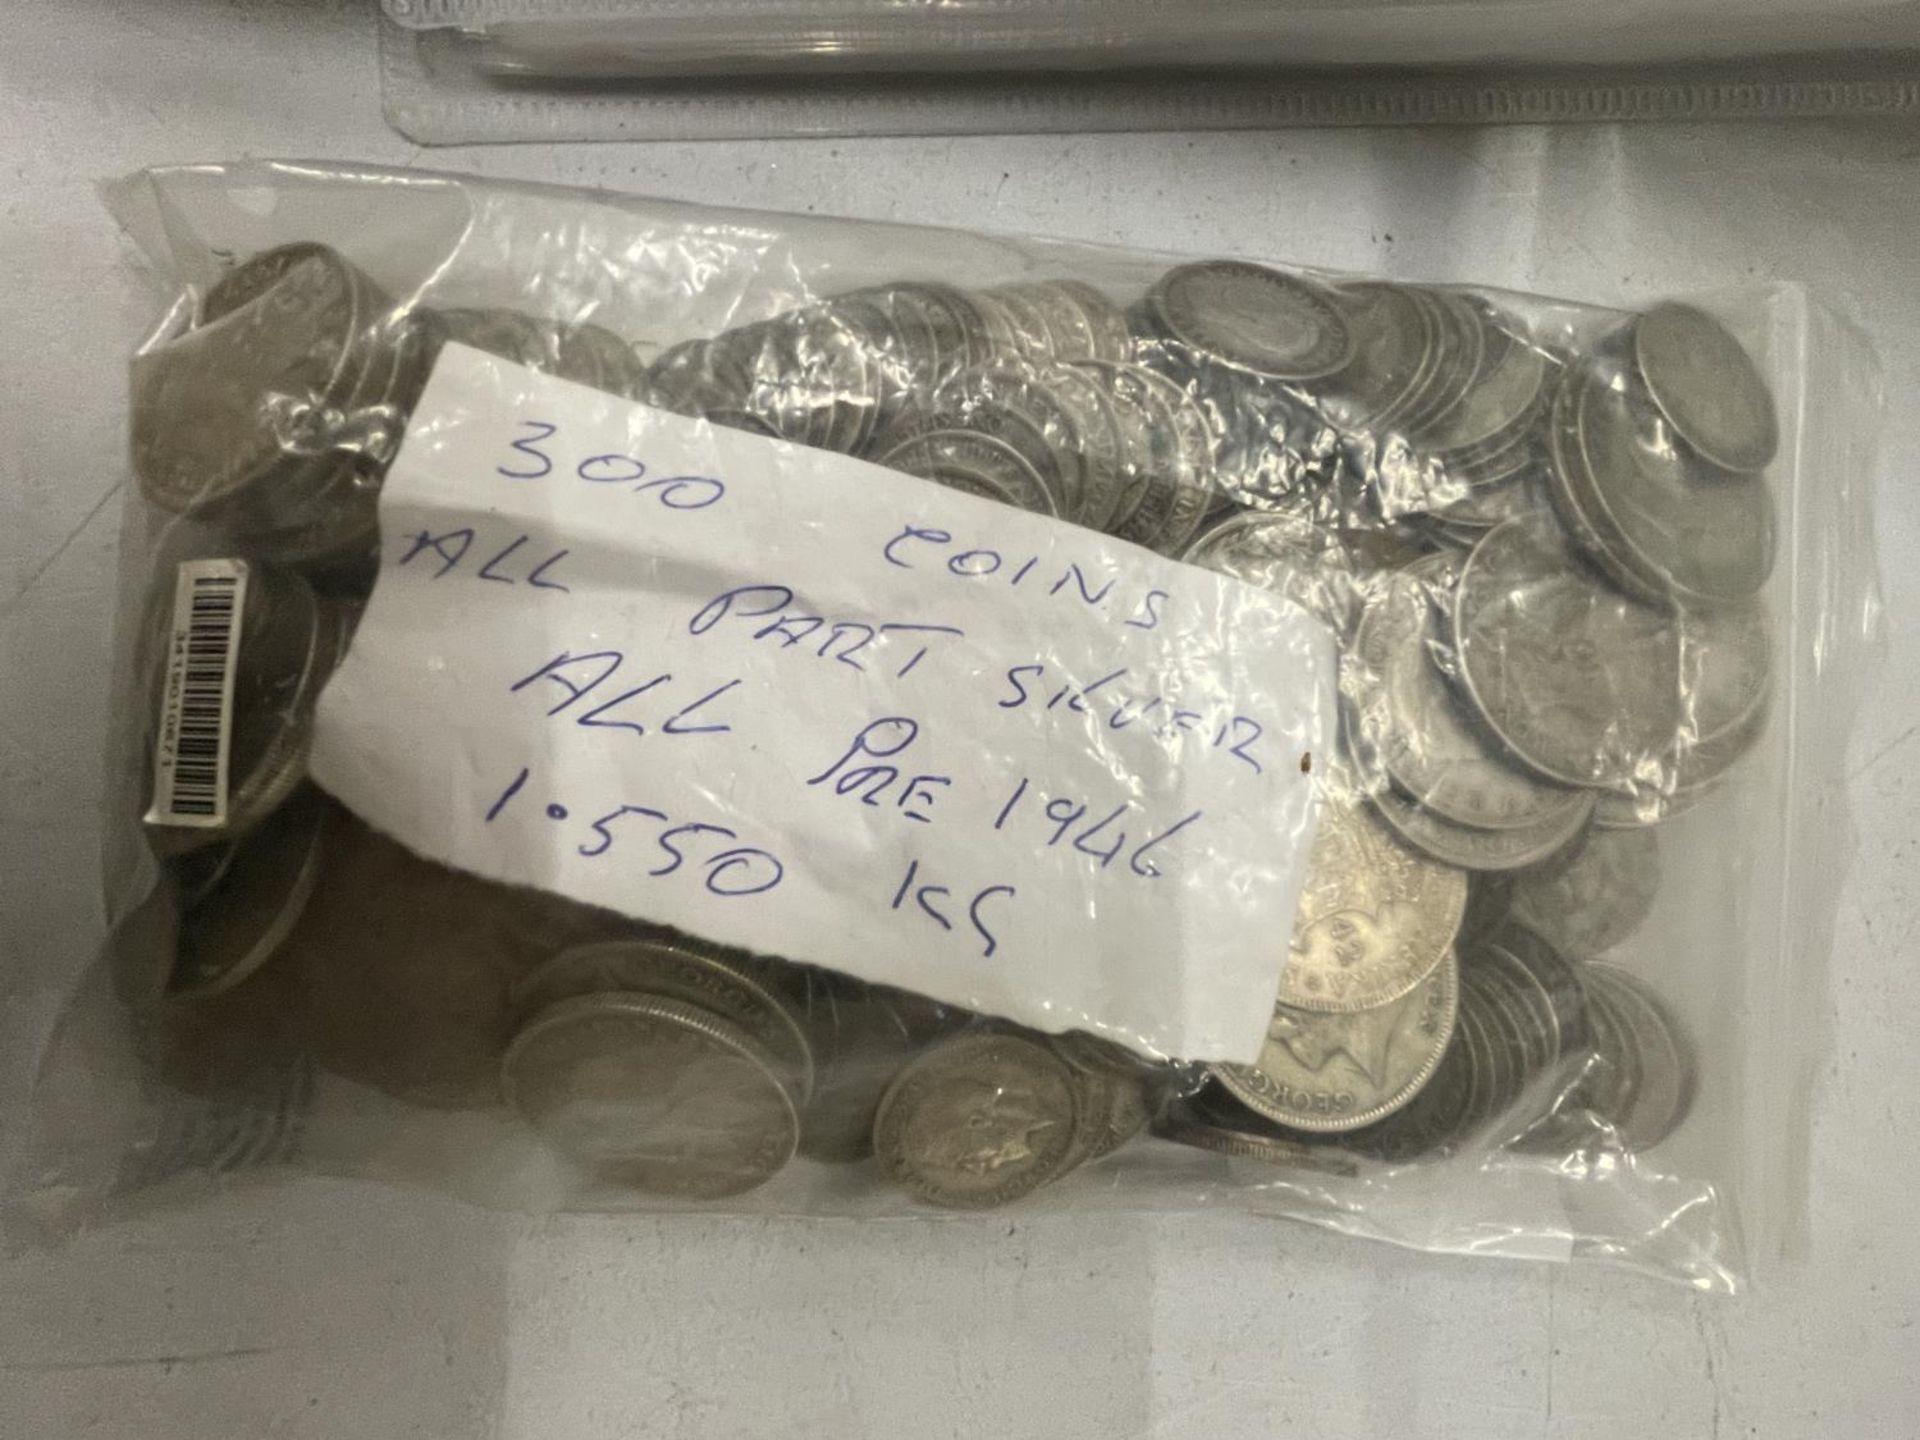 APPROX 300 PRE 1947 GB SILVER COINS TO INCLUDE HALF CROWNS, SHILLINGS, FLORINS, ETC - IN TOTAL 1.